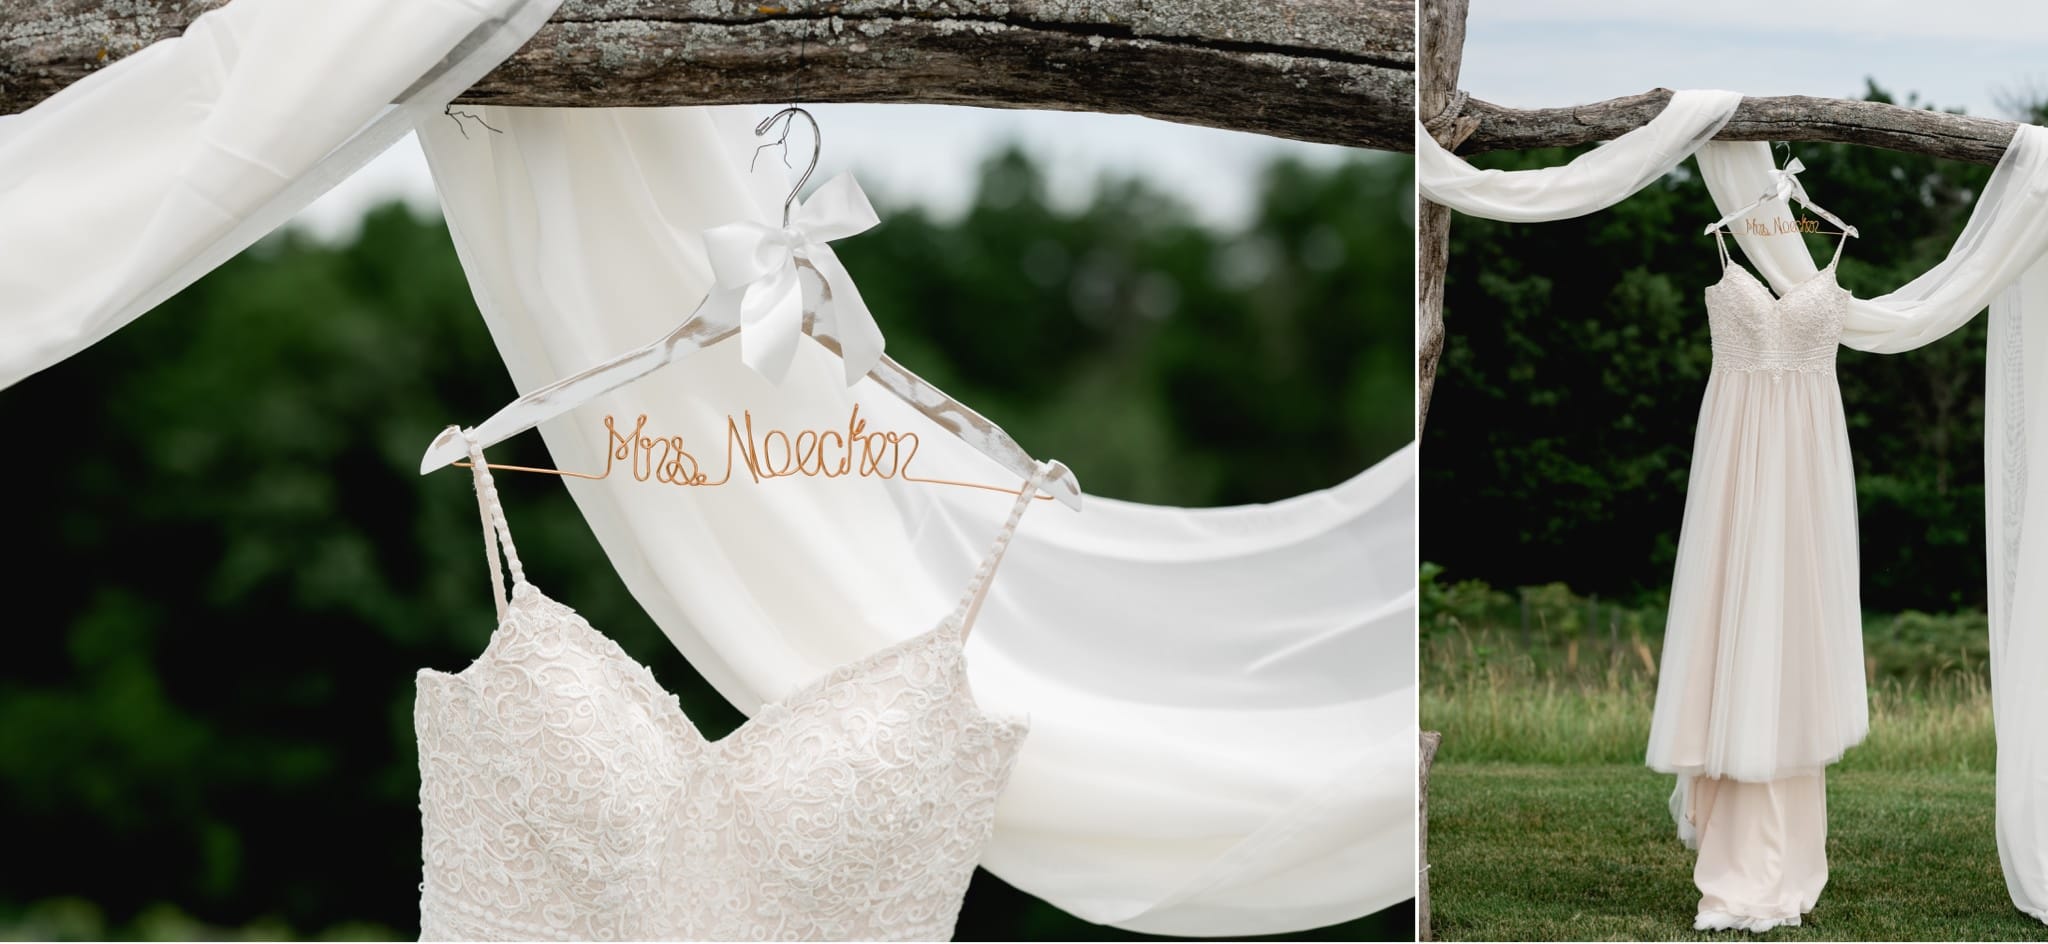 red acre barn wedding details